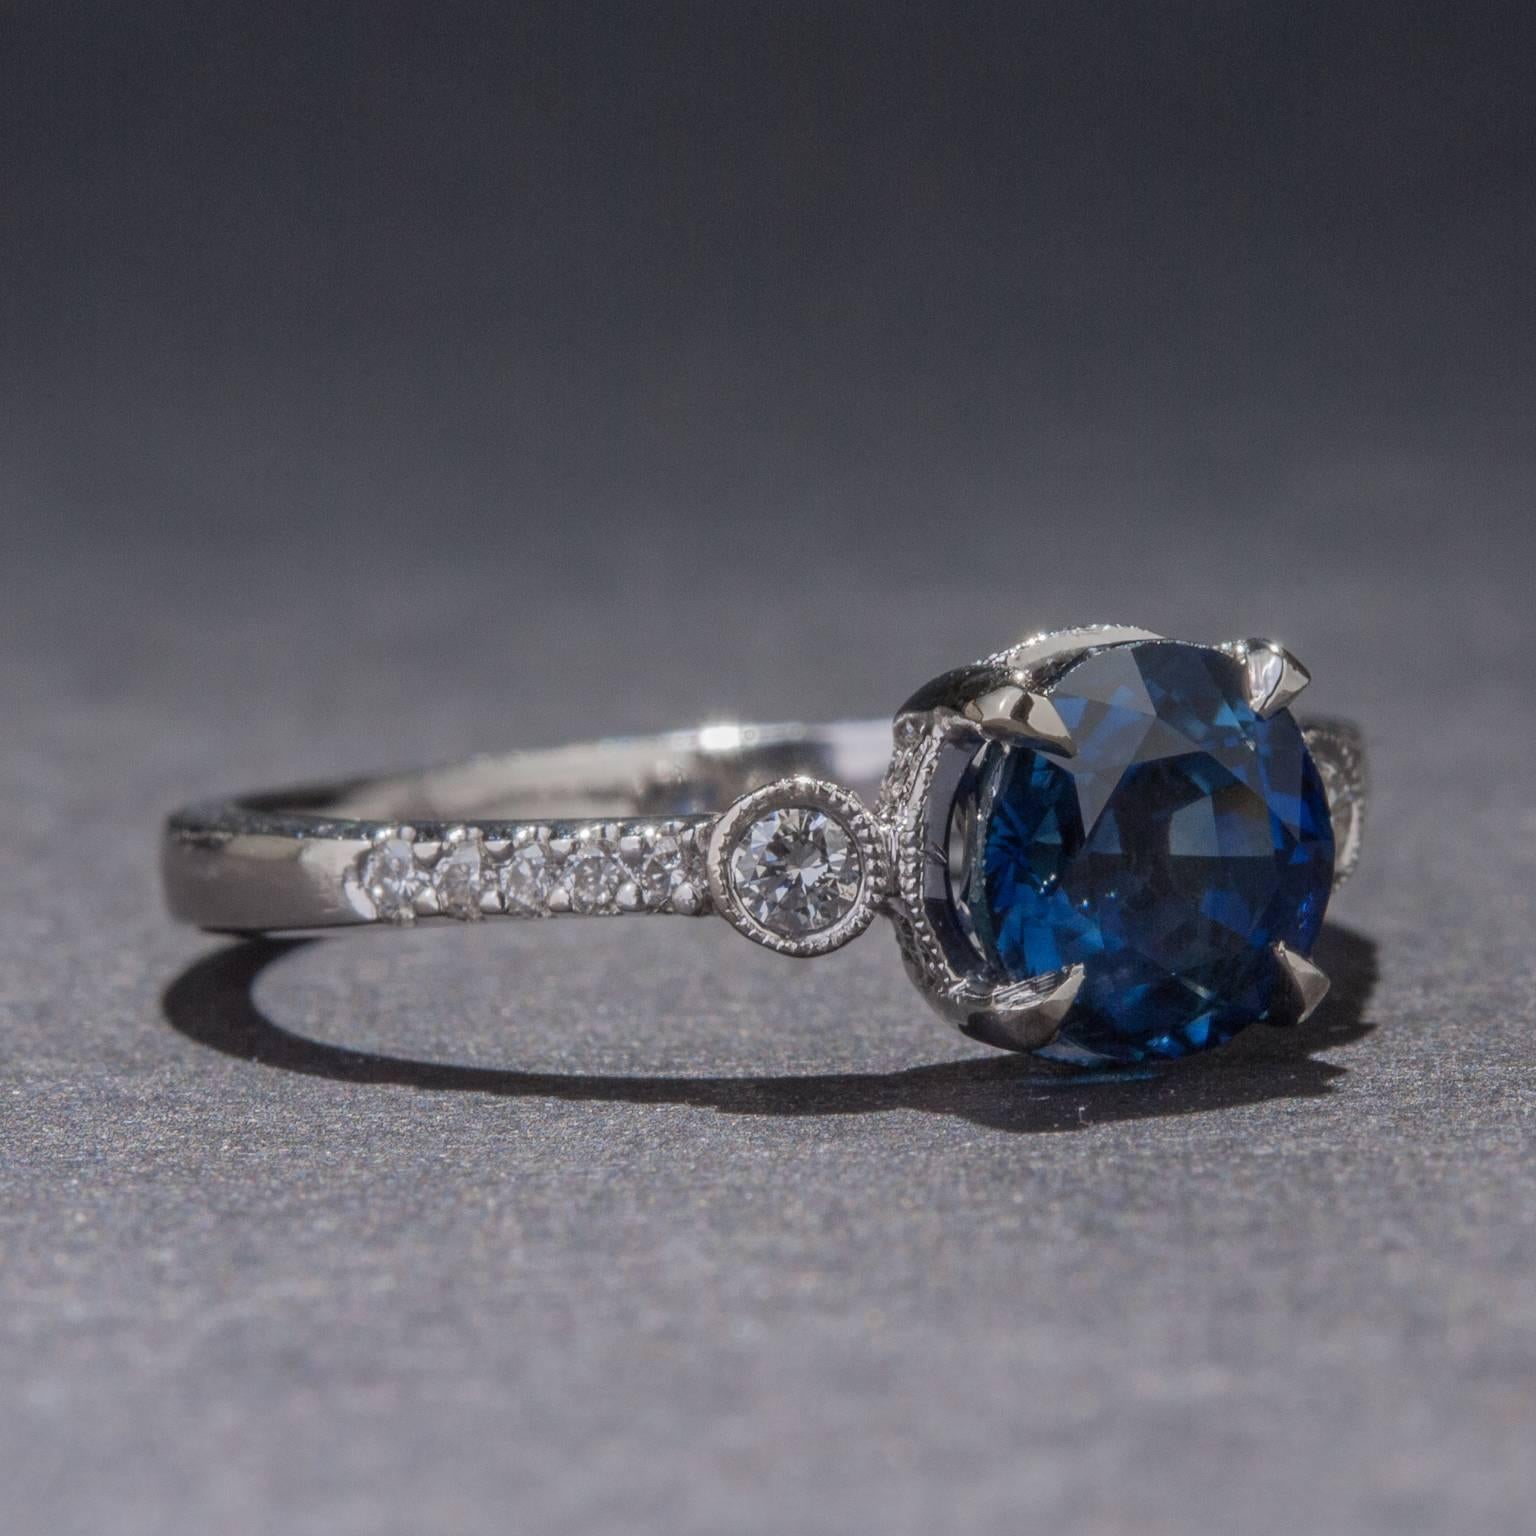 Deep blue sapphire color radiates from this elegant 18k white gold ring. The round sapphire weighs 2.01 carats and is complemented by .28 carats of diamonds. This is a classic ring design with vibrant color and diamond sparkle.